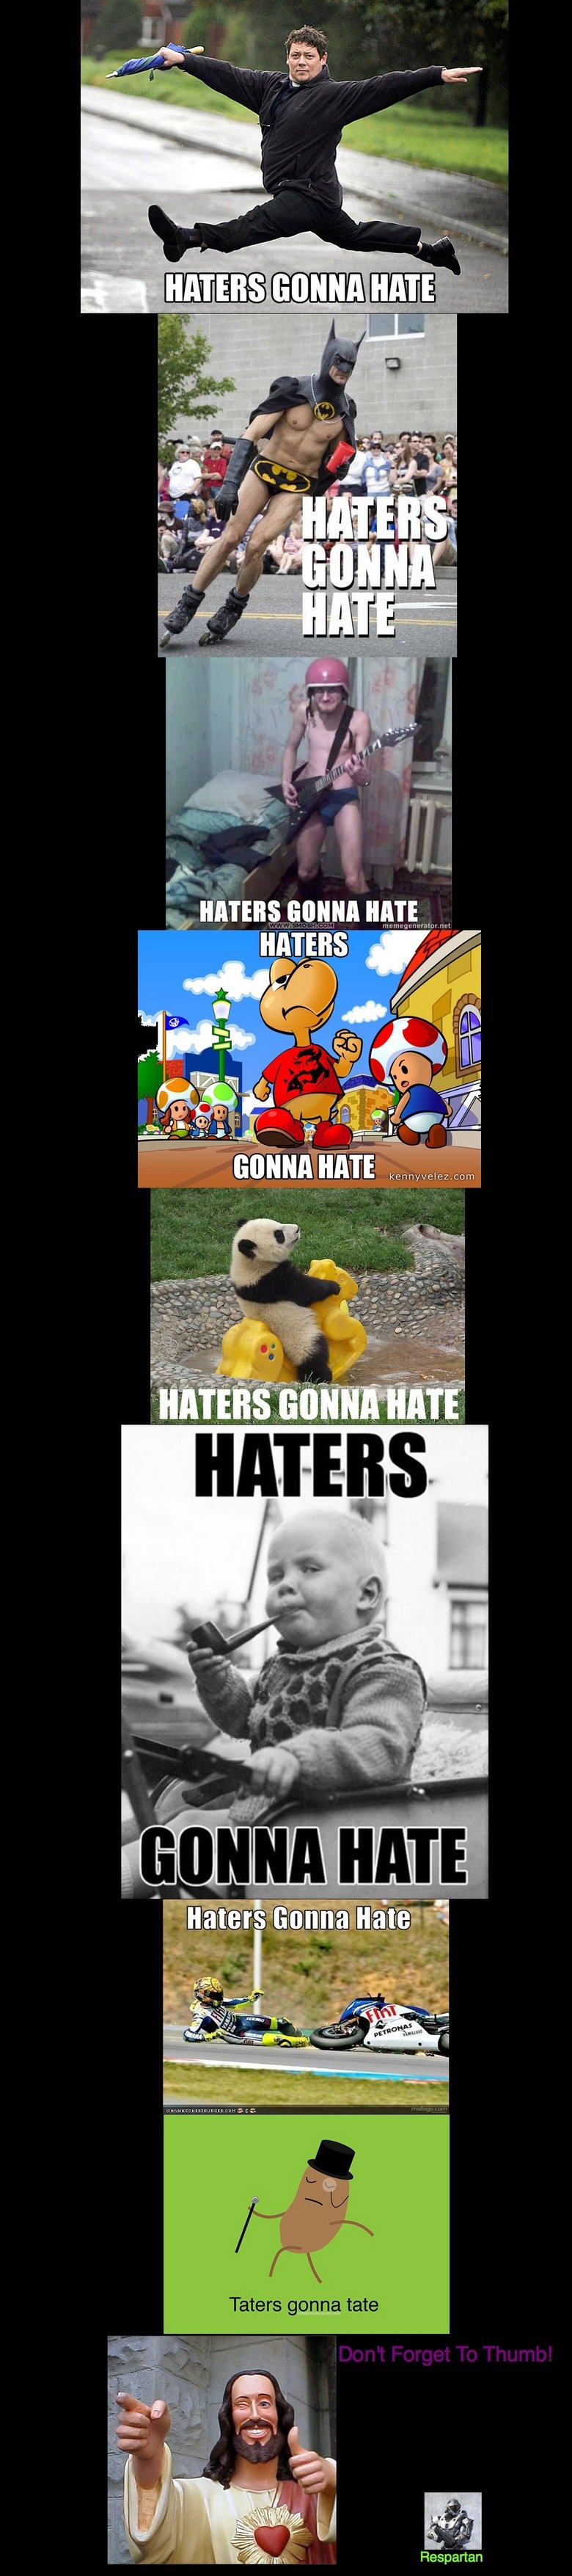 Haters Gonna Hate!. . Taters gonna we Respartan. haters gonna hate